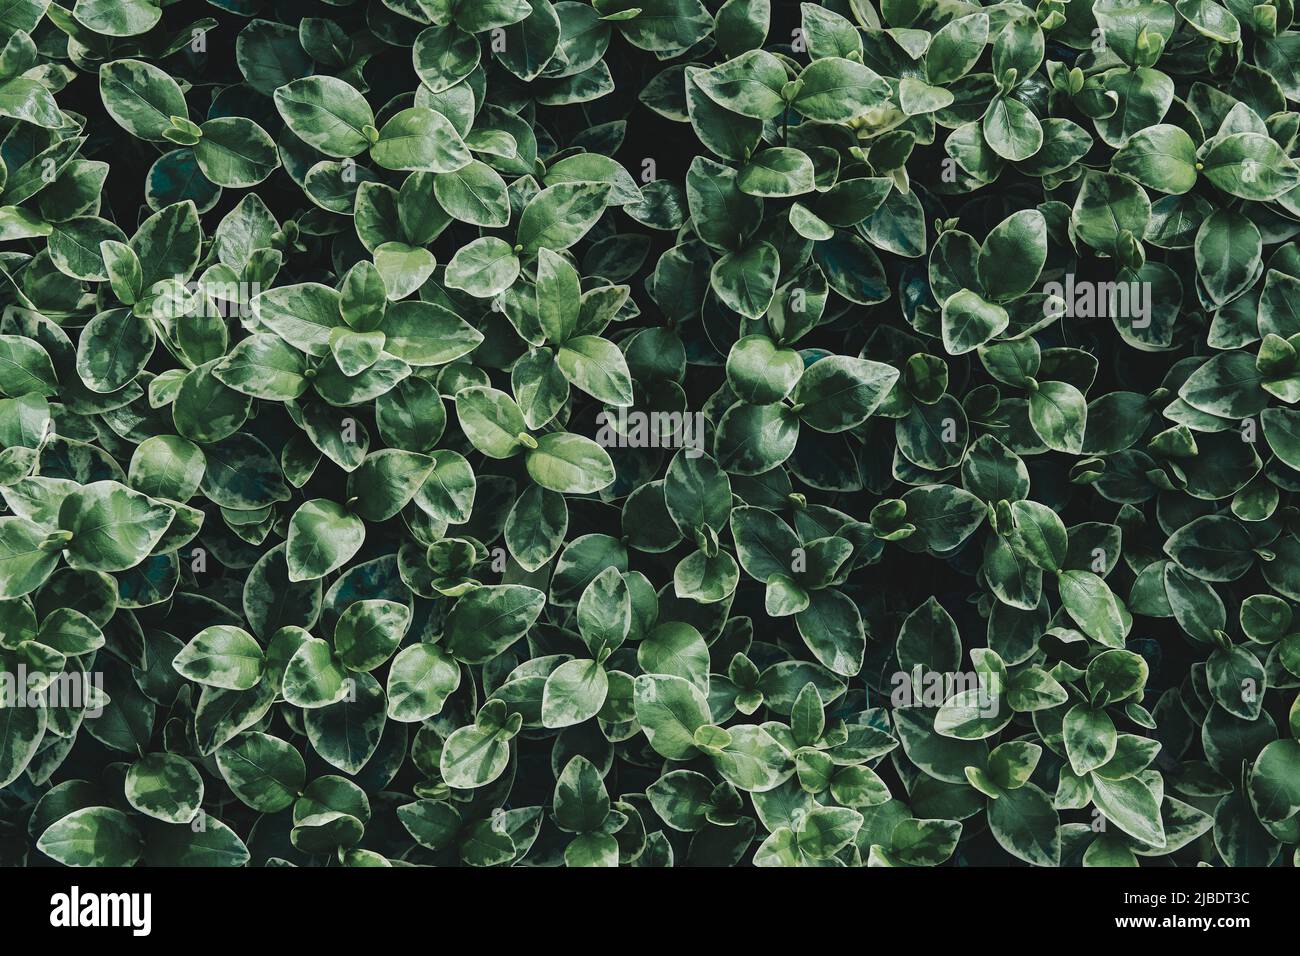 Green leaves background of Peperomia. Natural floral background of exotic green foliage of Cupid Peperomia. Texture of Peperomia serpens variegata Stock Photo